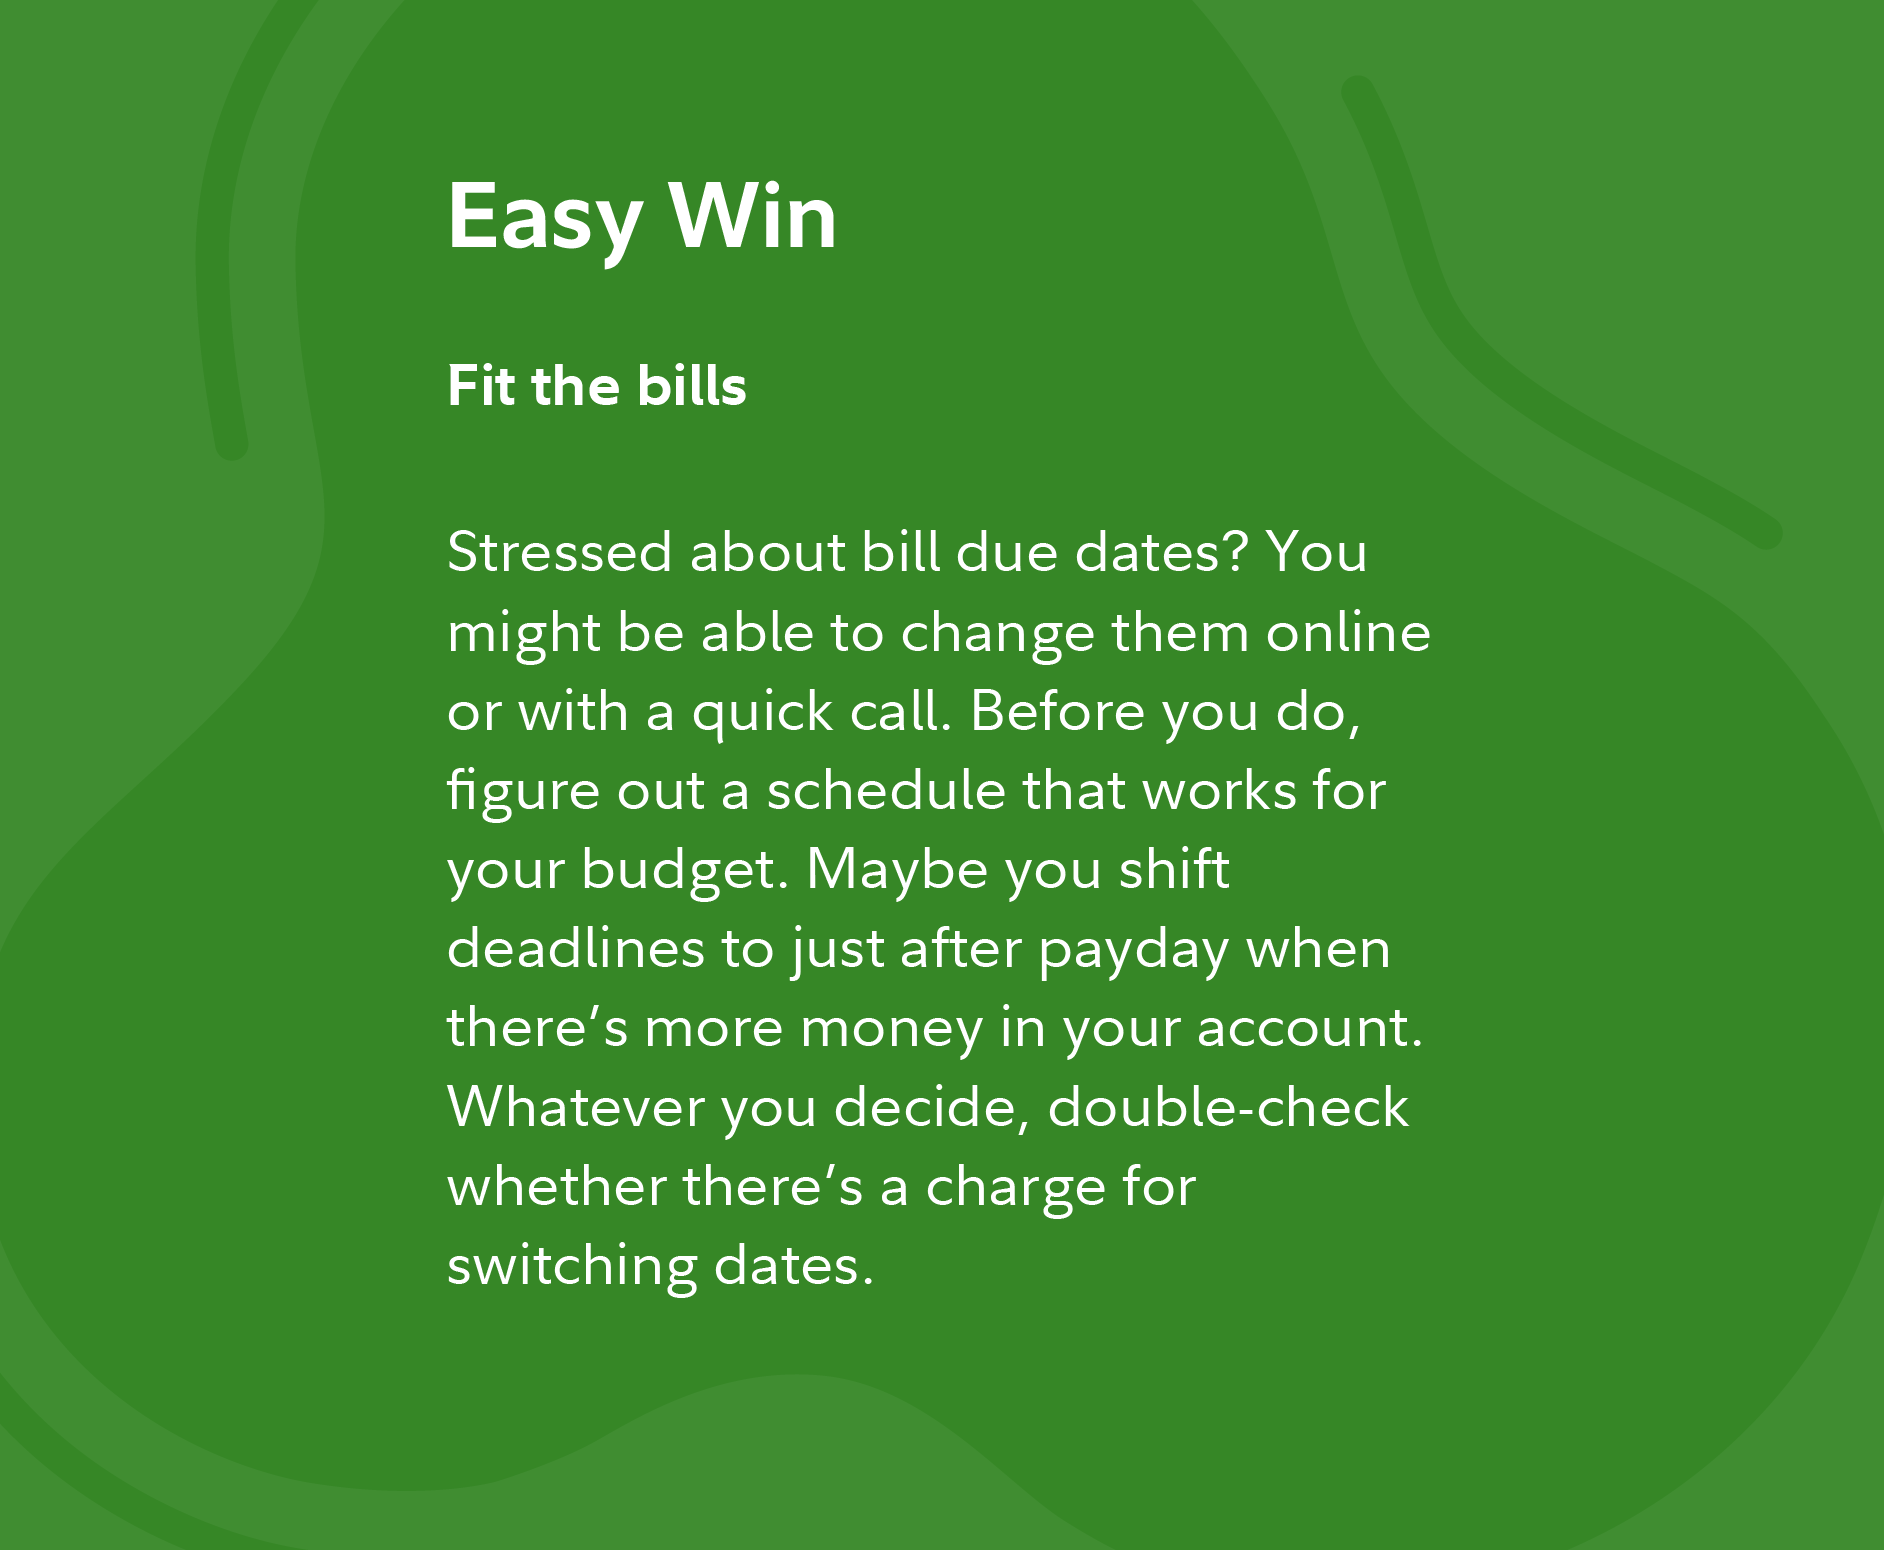 easy-win-sm_fit-the-bills